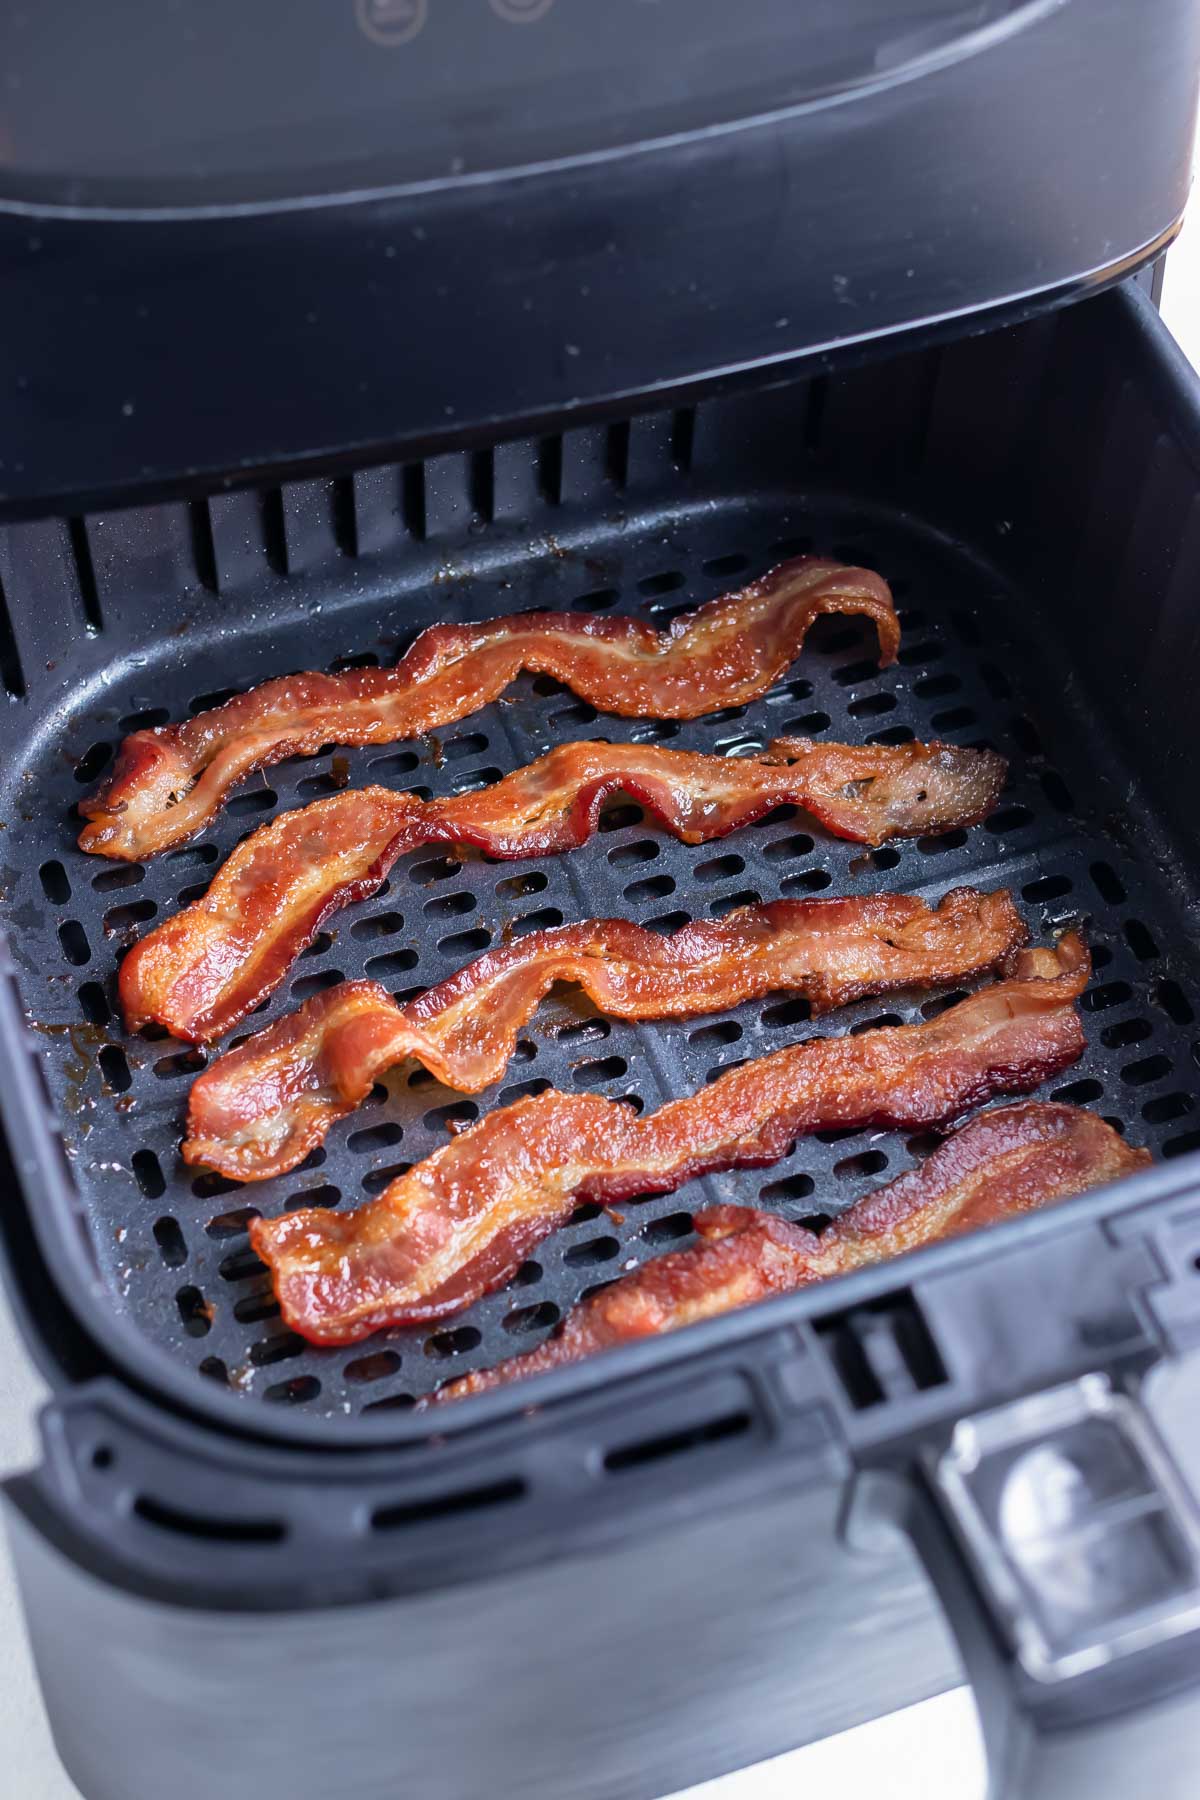 Bacon cooks in the air fryer until crispy.